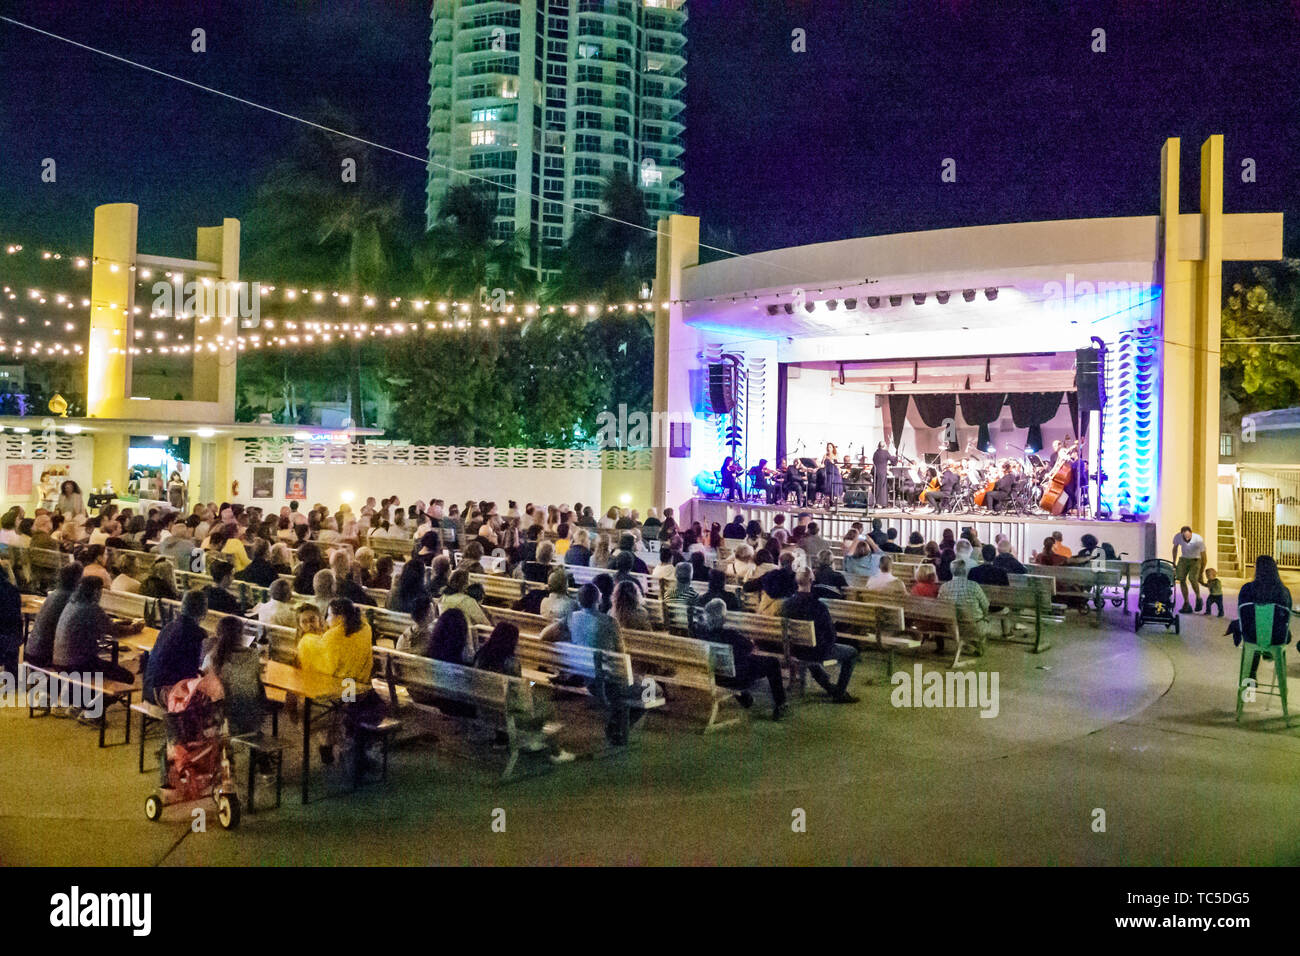 Miami Beach Florida,North Beach Bandshell,Beethoven on the Beach free classical music concert,community orchestra,opera singer,woman female women,stag Stock Photo